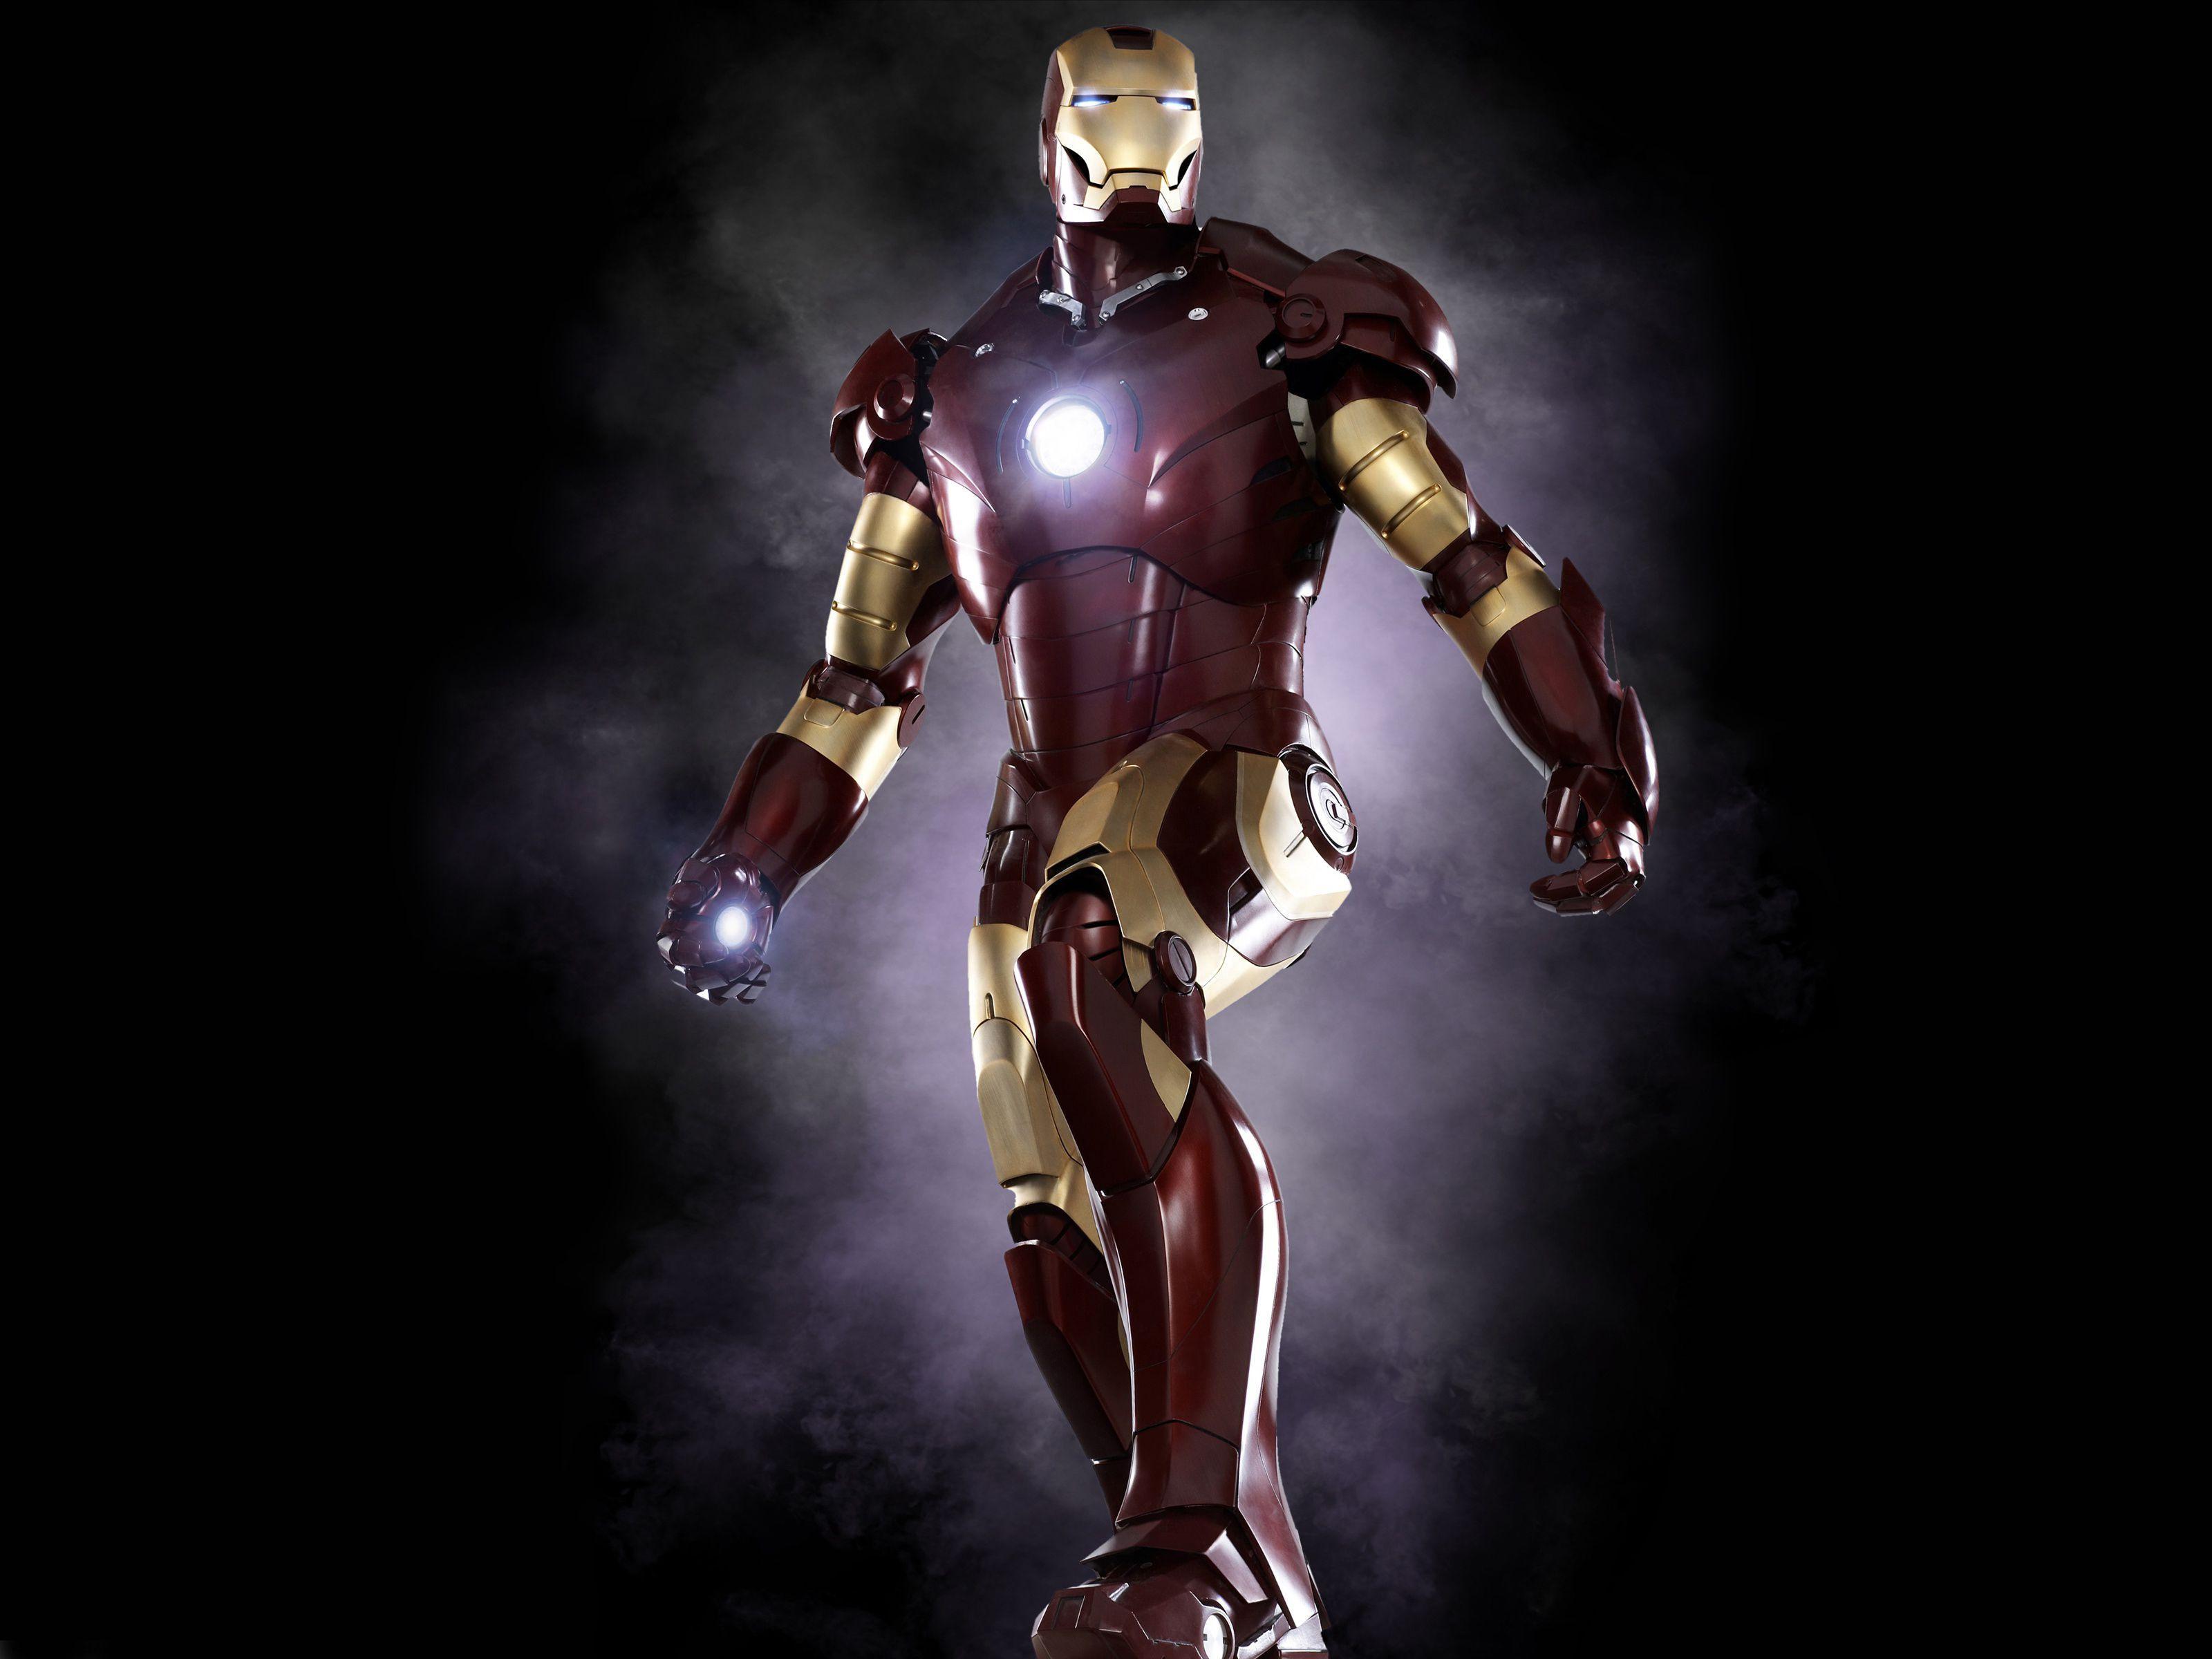 Iron Man 3 Wallpaper, 45 PC Iron Man 3 Image in New Collection